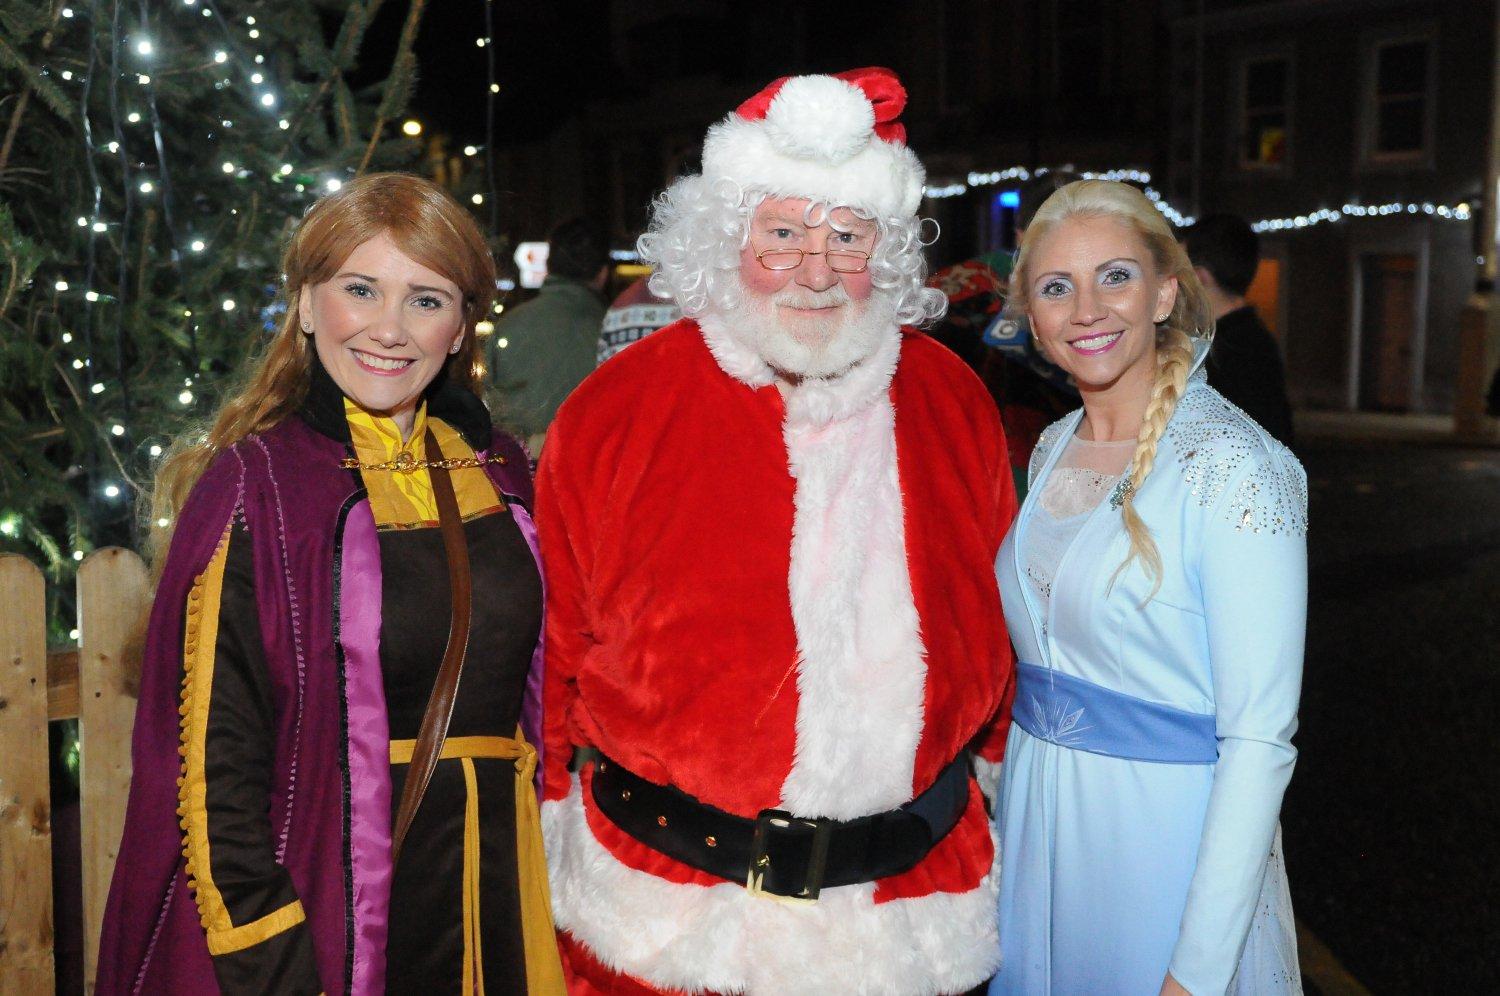 Ana and Elsa from Frozen with Santa.